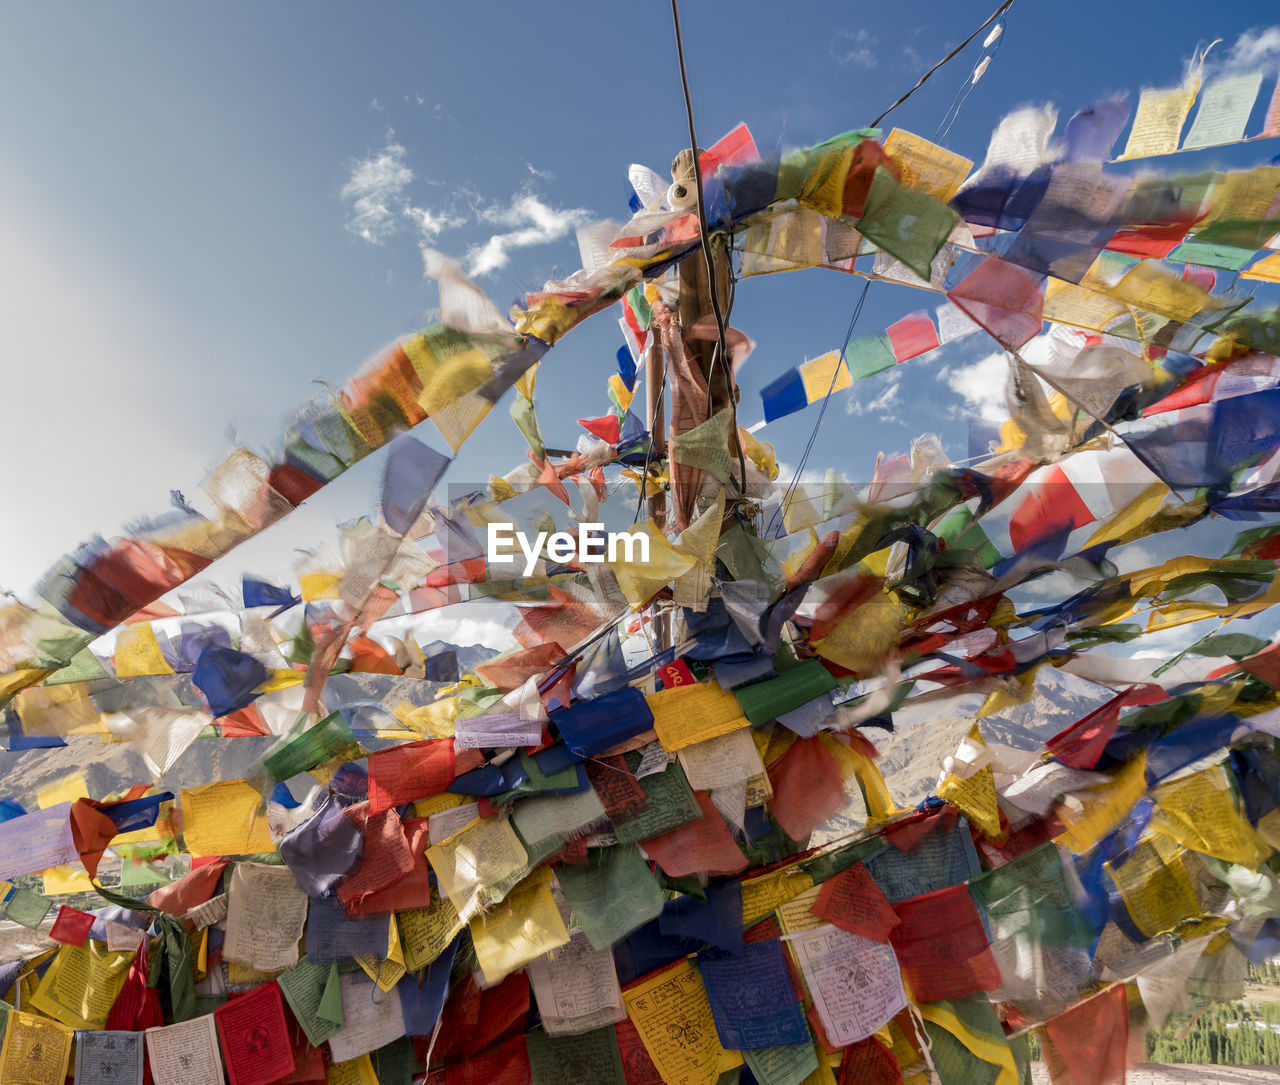 Low angle view of colorful prayer flags hanging against sky